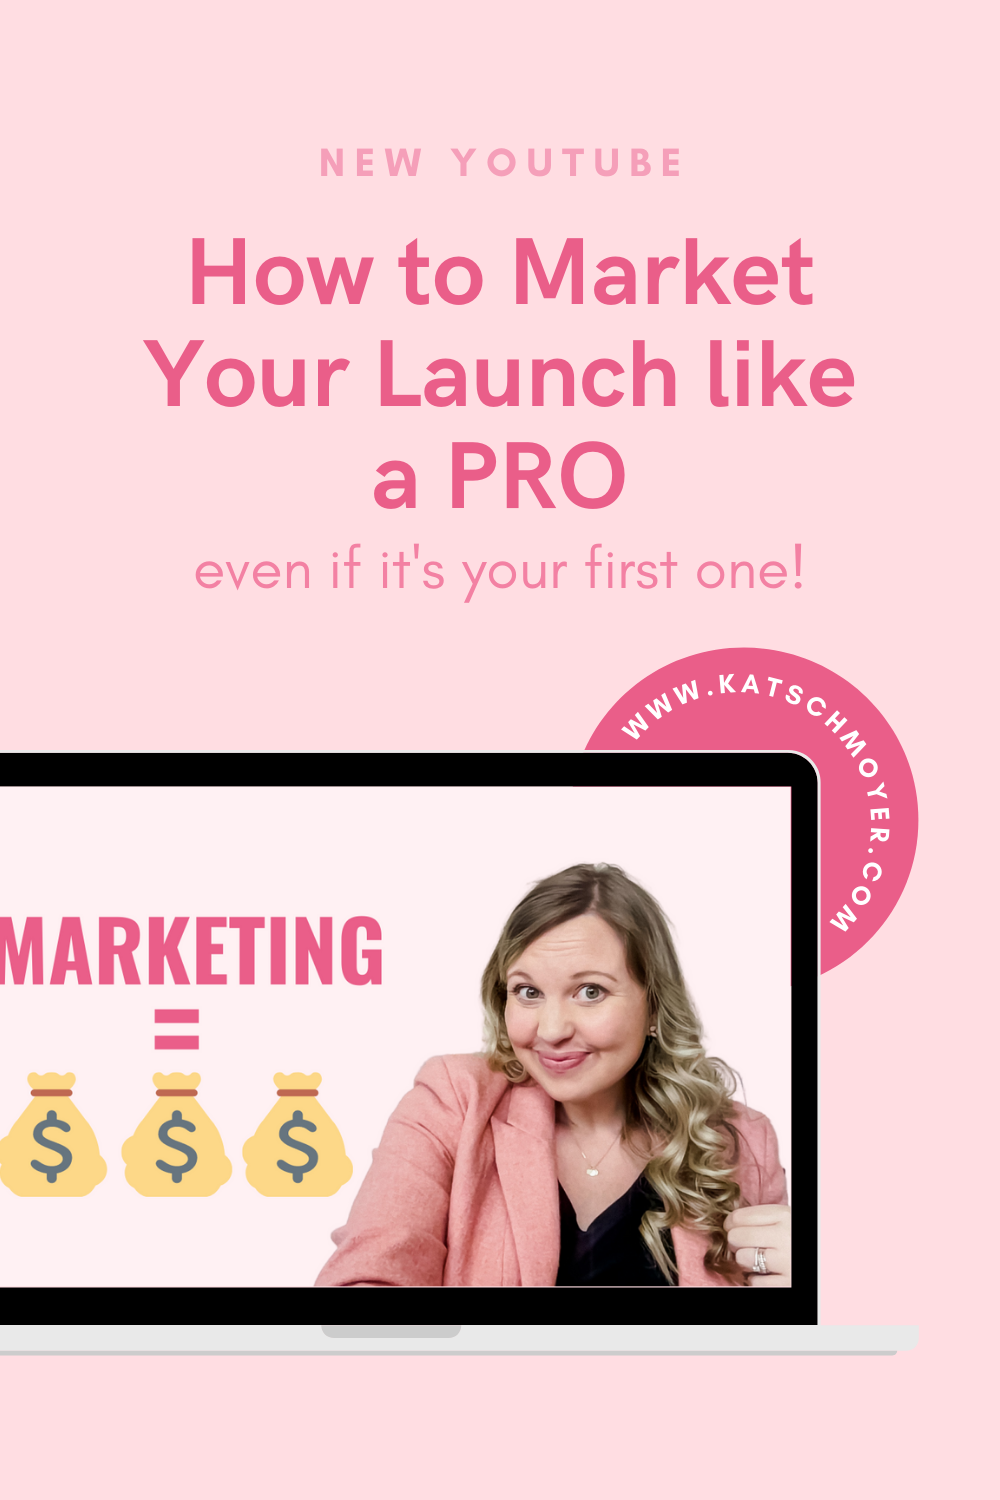 How to Market Your Launch like a PRO (even if it's your first one!)